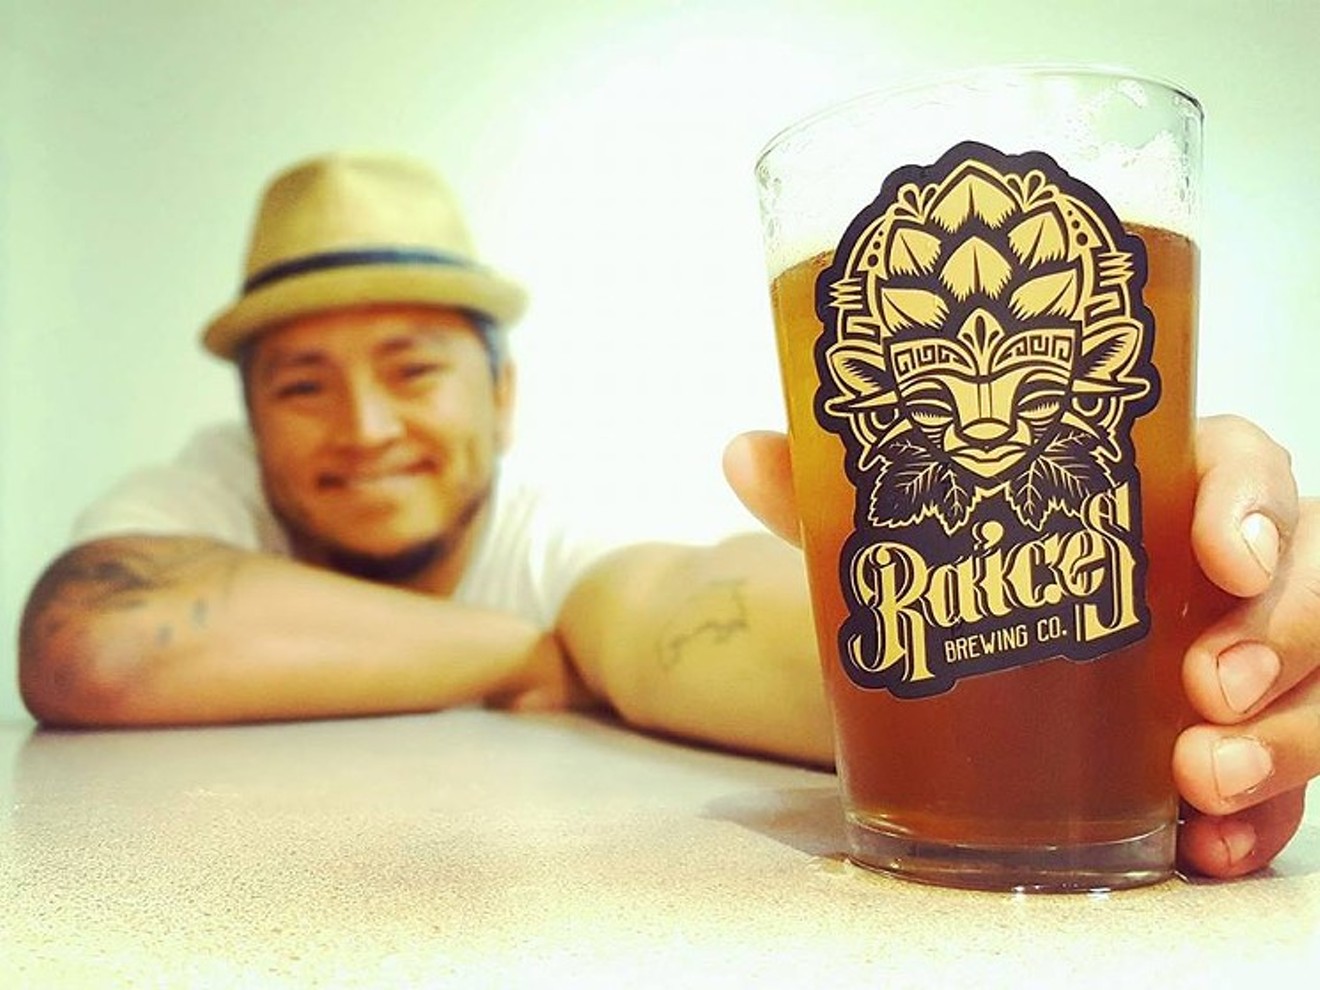 The owners of Raices Brewing, Jose Beteta (pictured here) and Tamil Maldonado, are organizing Suave Fest.